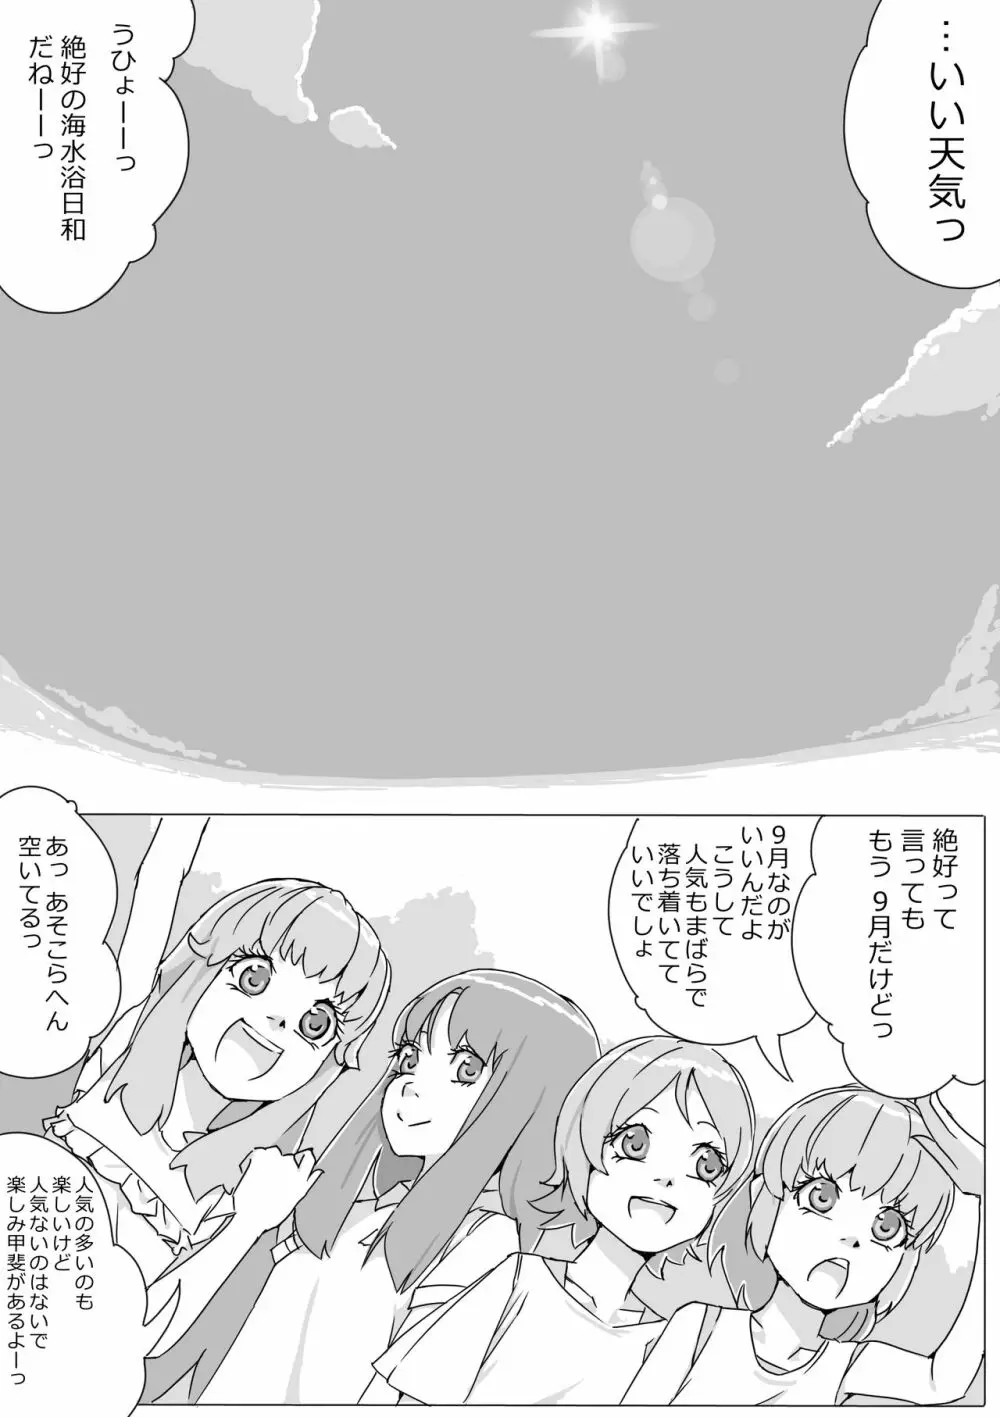 Untitled Precure Doujinshi 201709 - page1